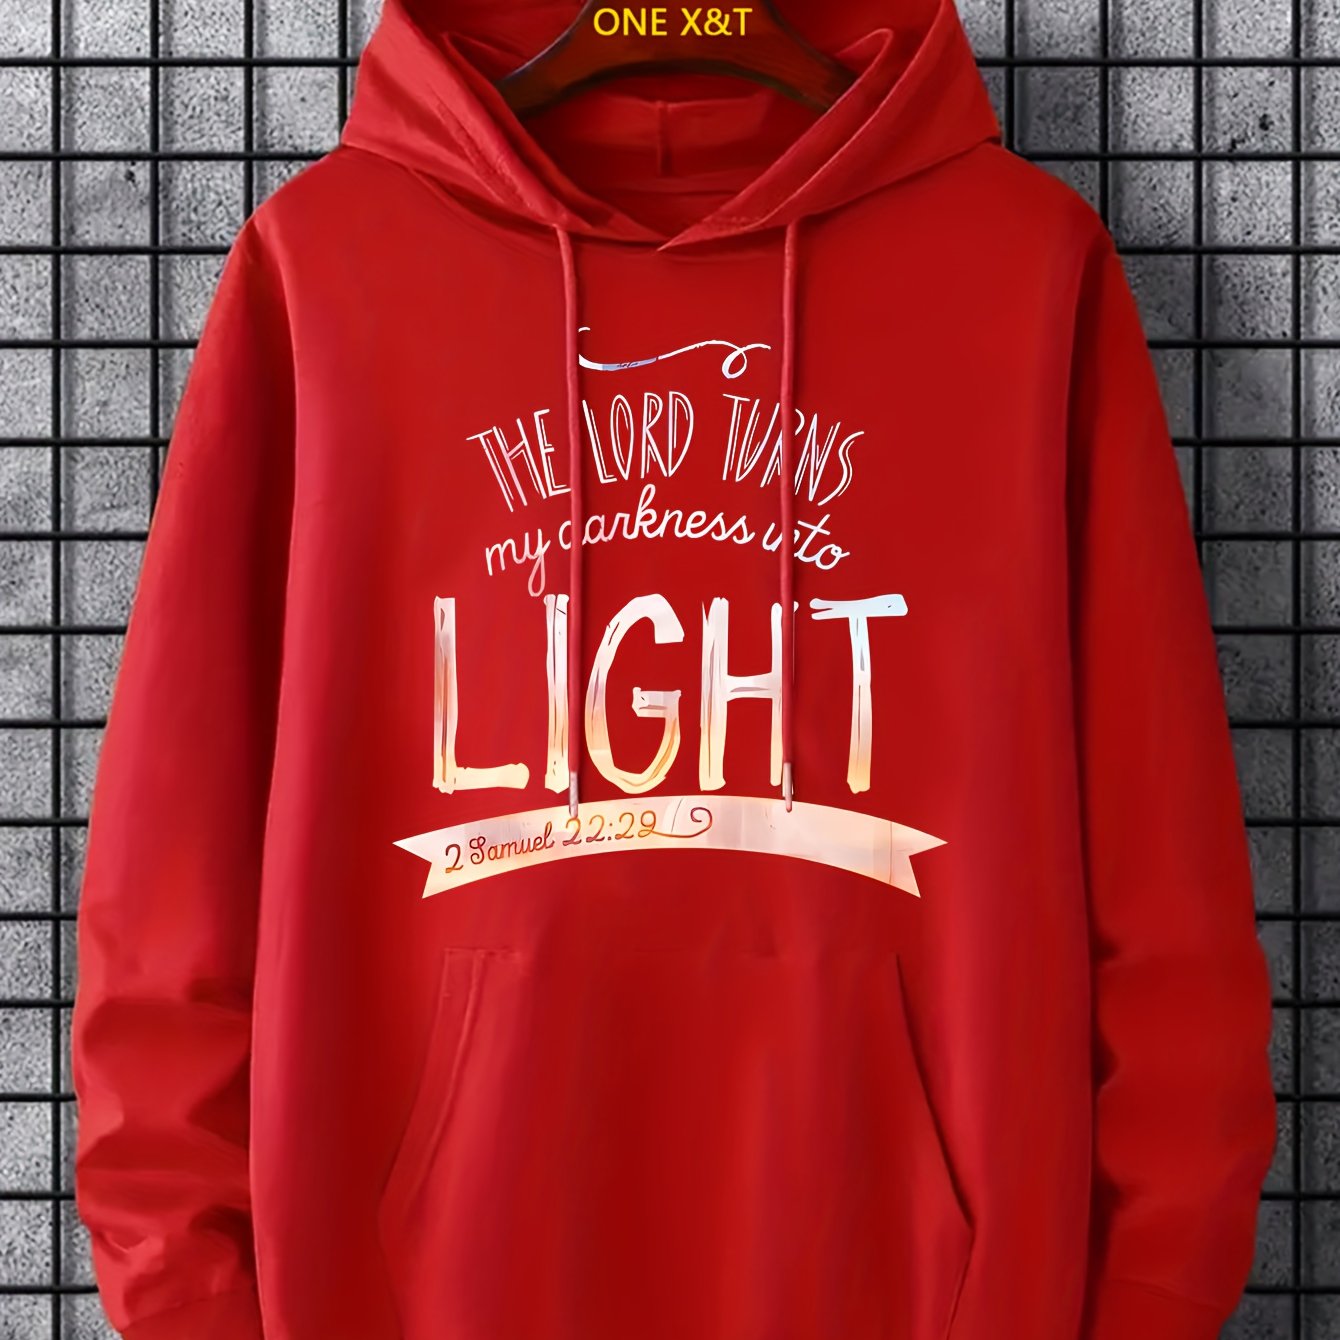 2 Samuel 22:22 The Lord Turns My Darkness Into Light Unisex Christian Pullover Hooded Sweatshirt claimedbygoddesigns